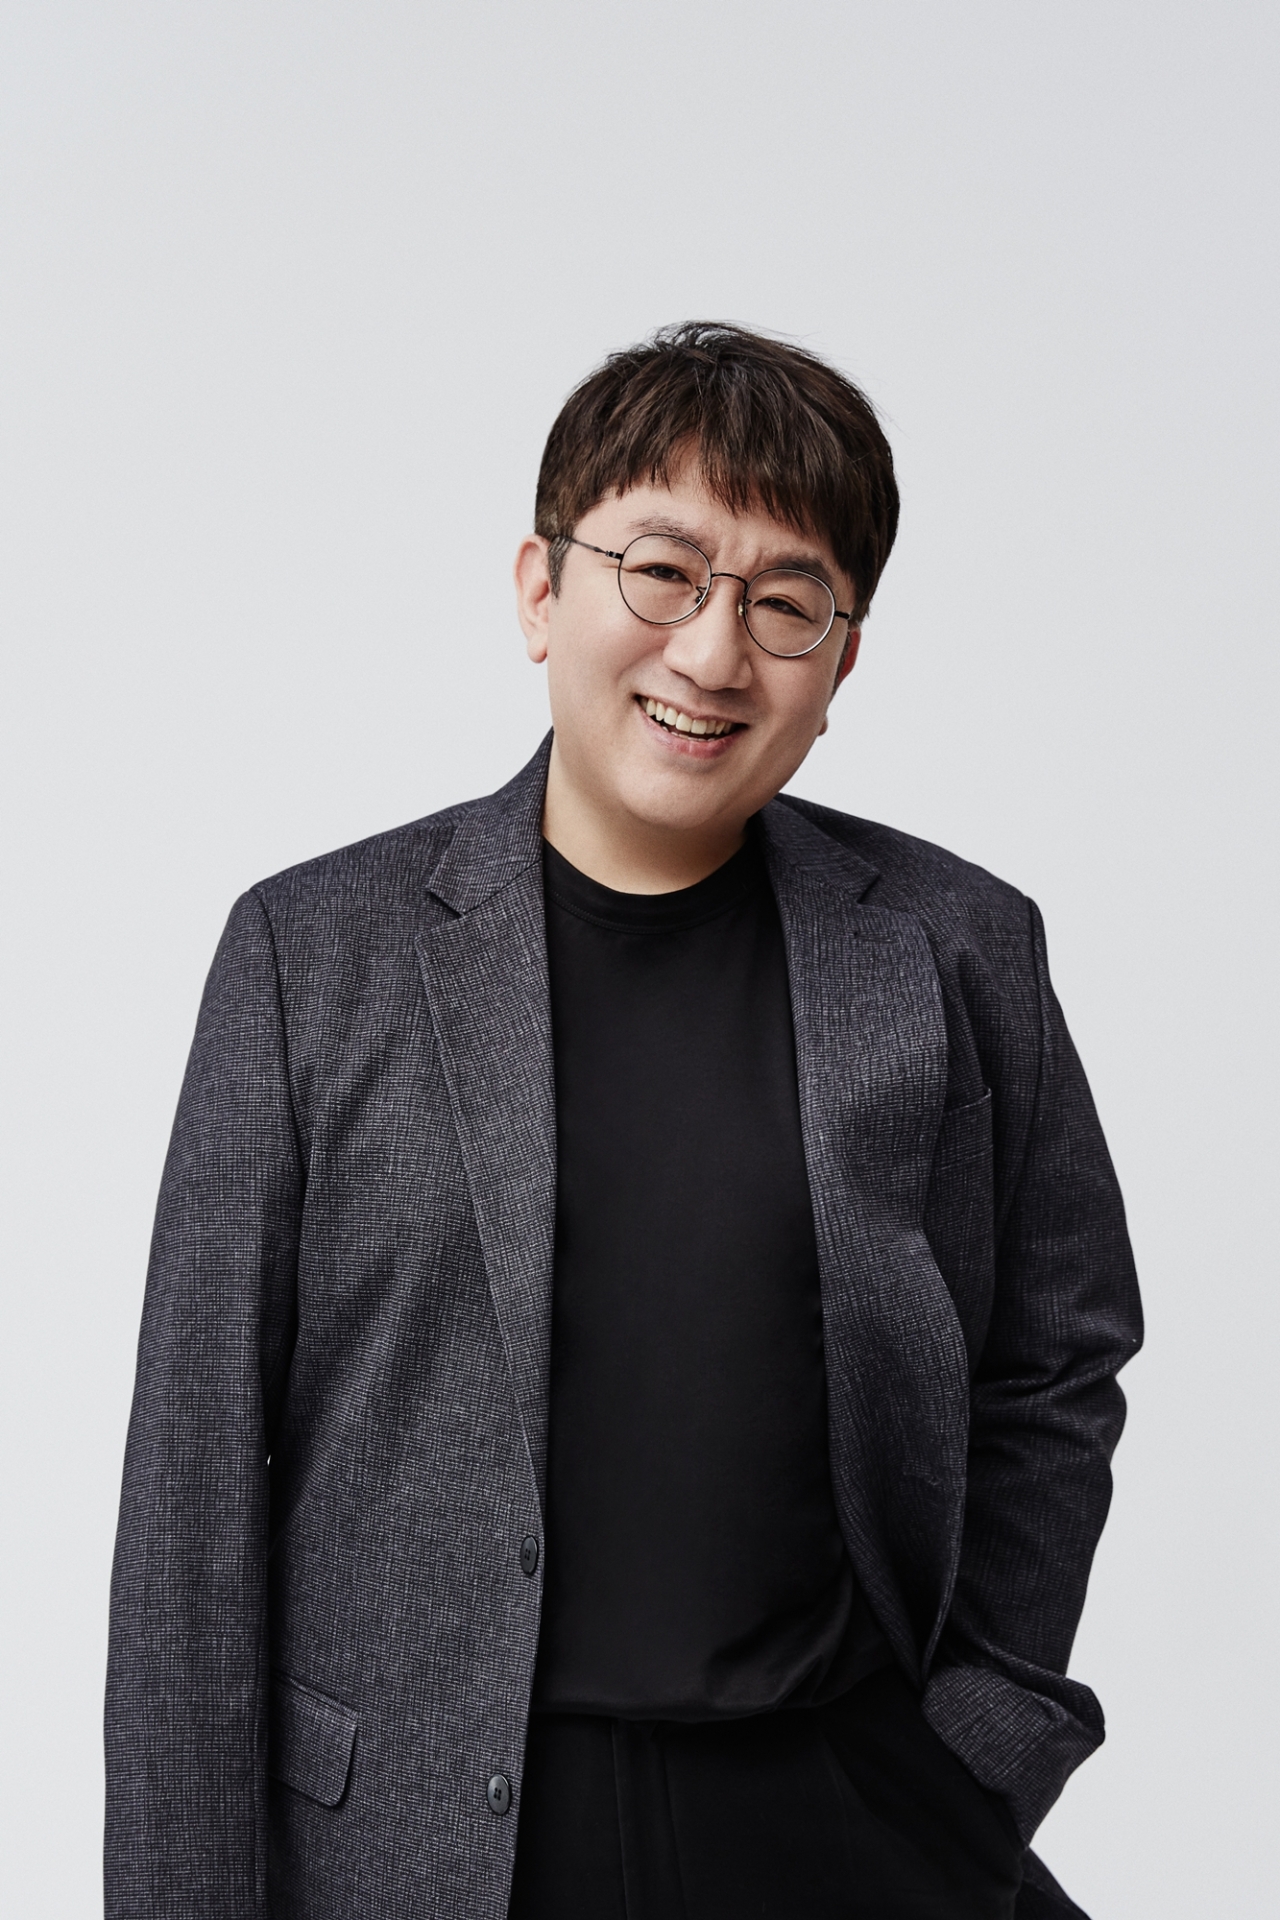 Who are the key players at Hybe in the post-Bang Si-hyuk era?